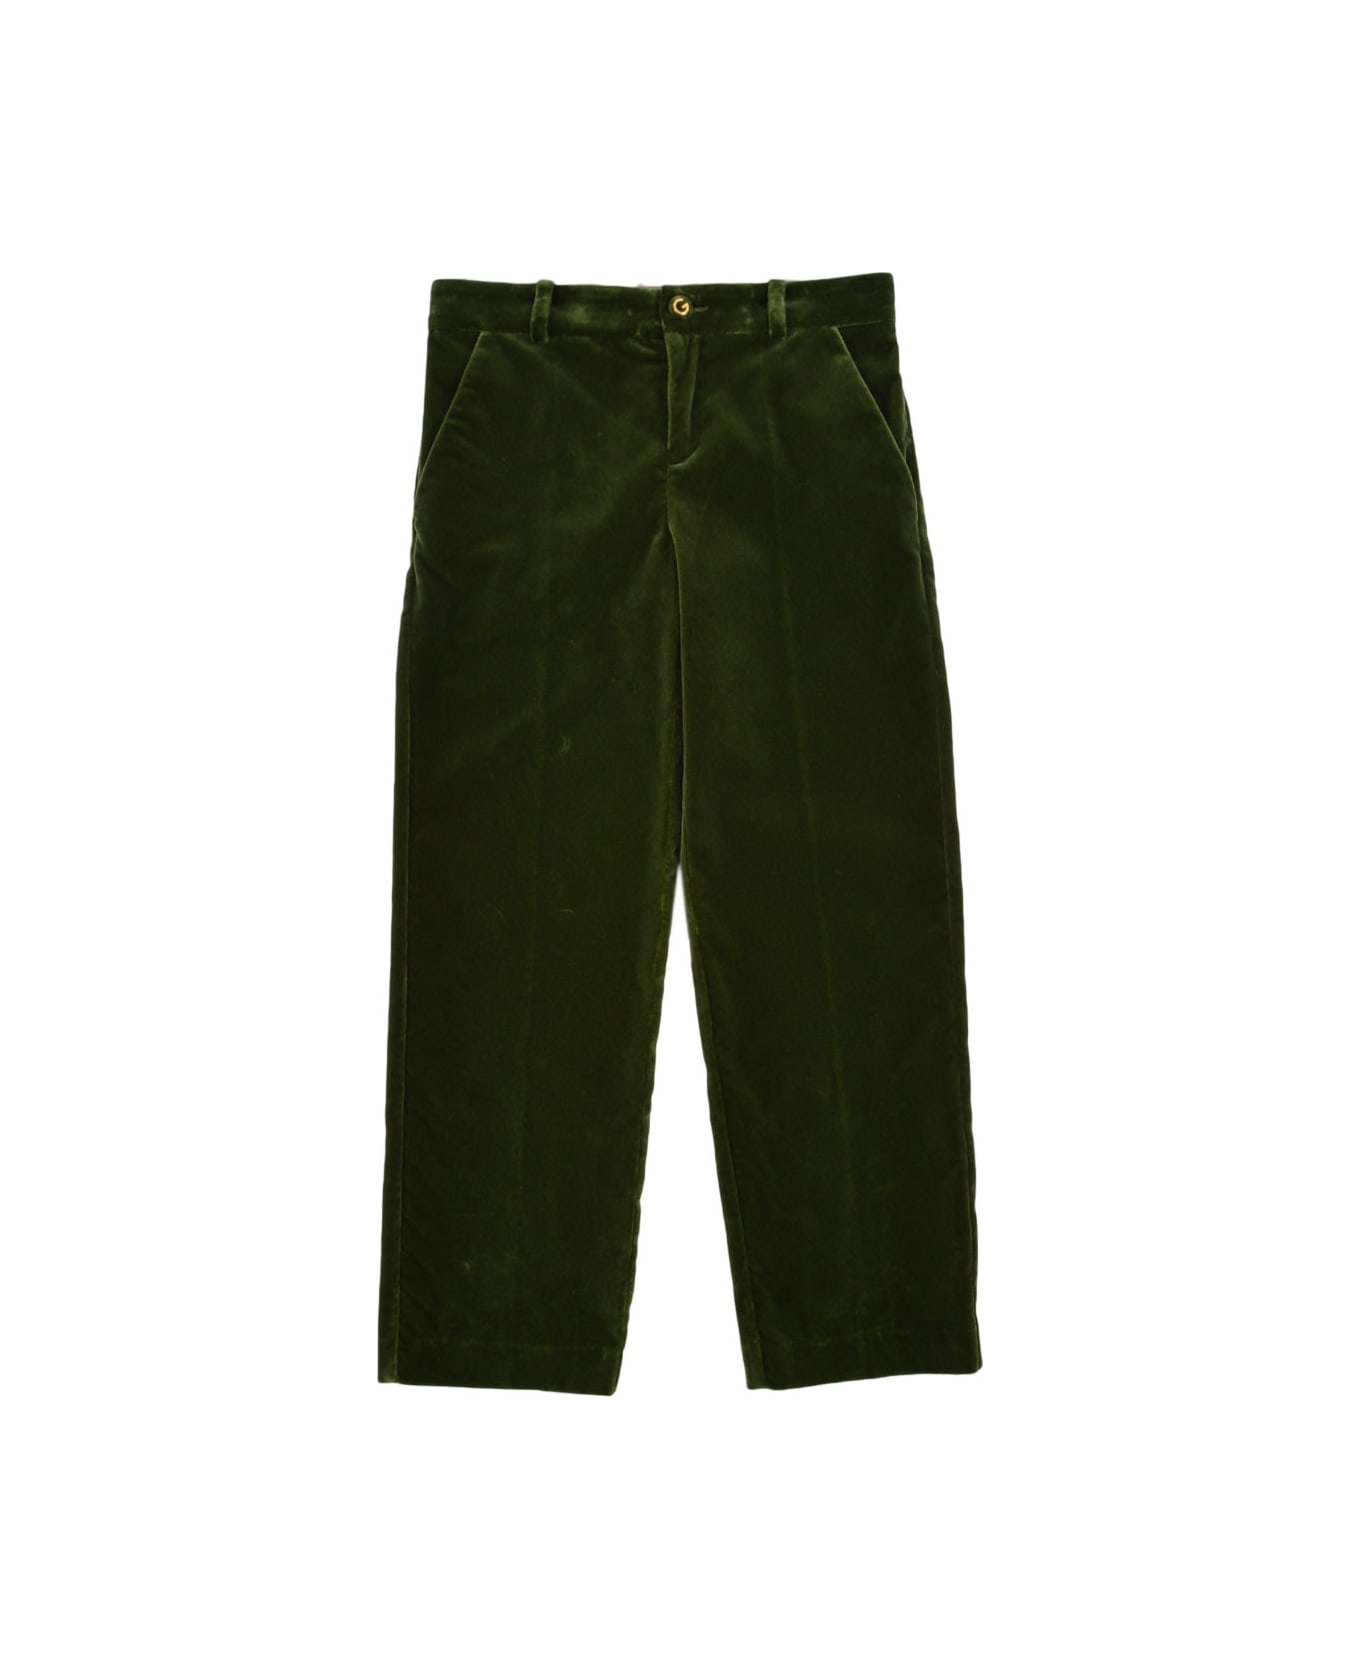 Gucci Cotton Velvet Trousers - Green ボトムス